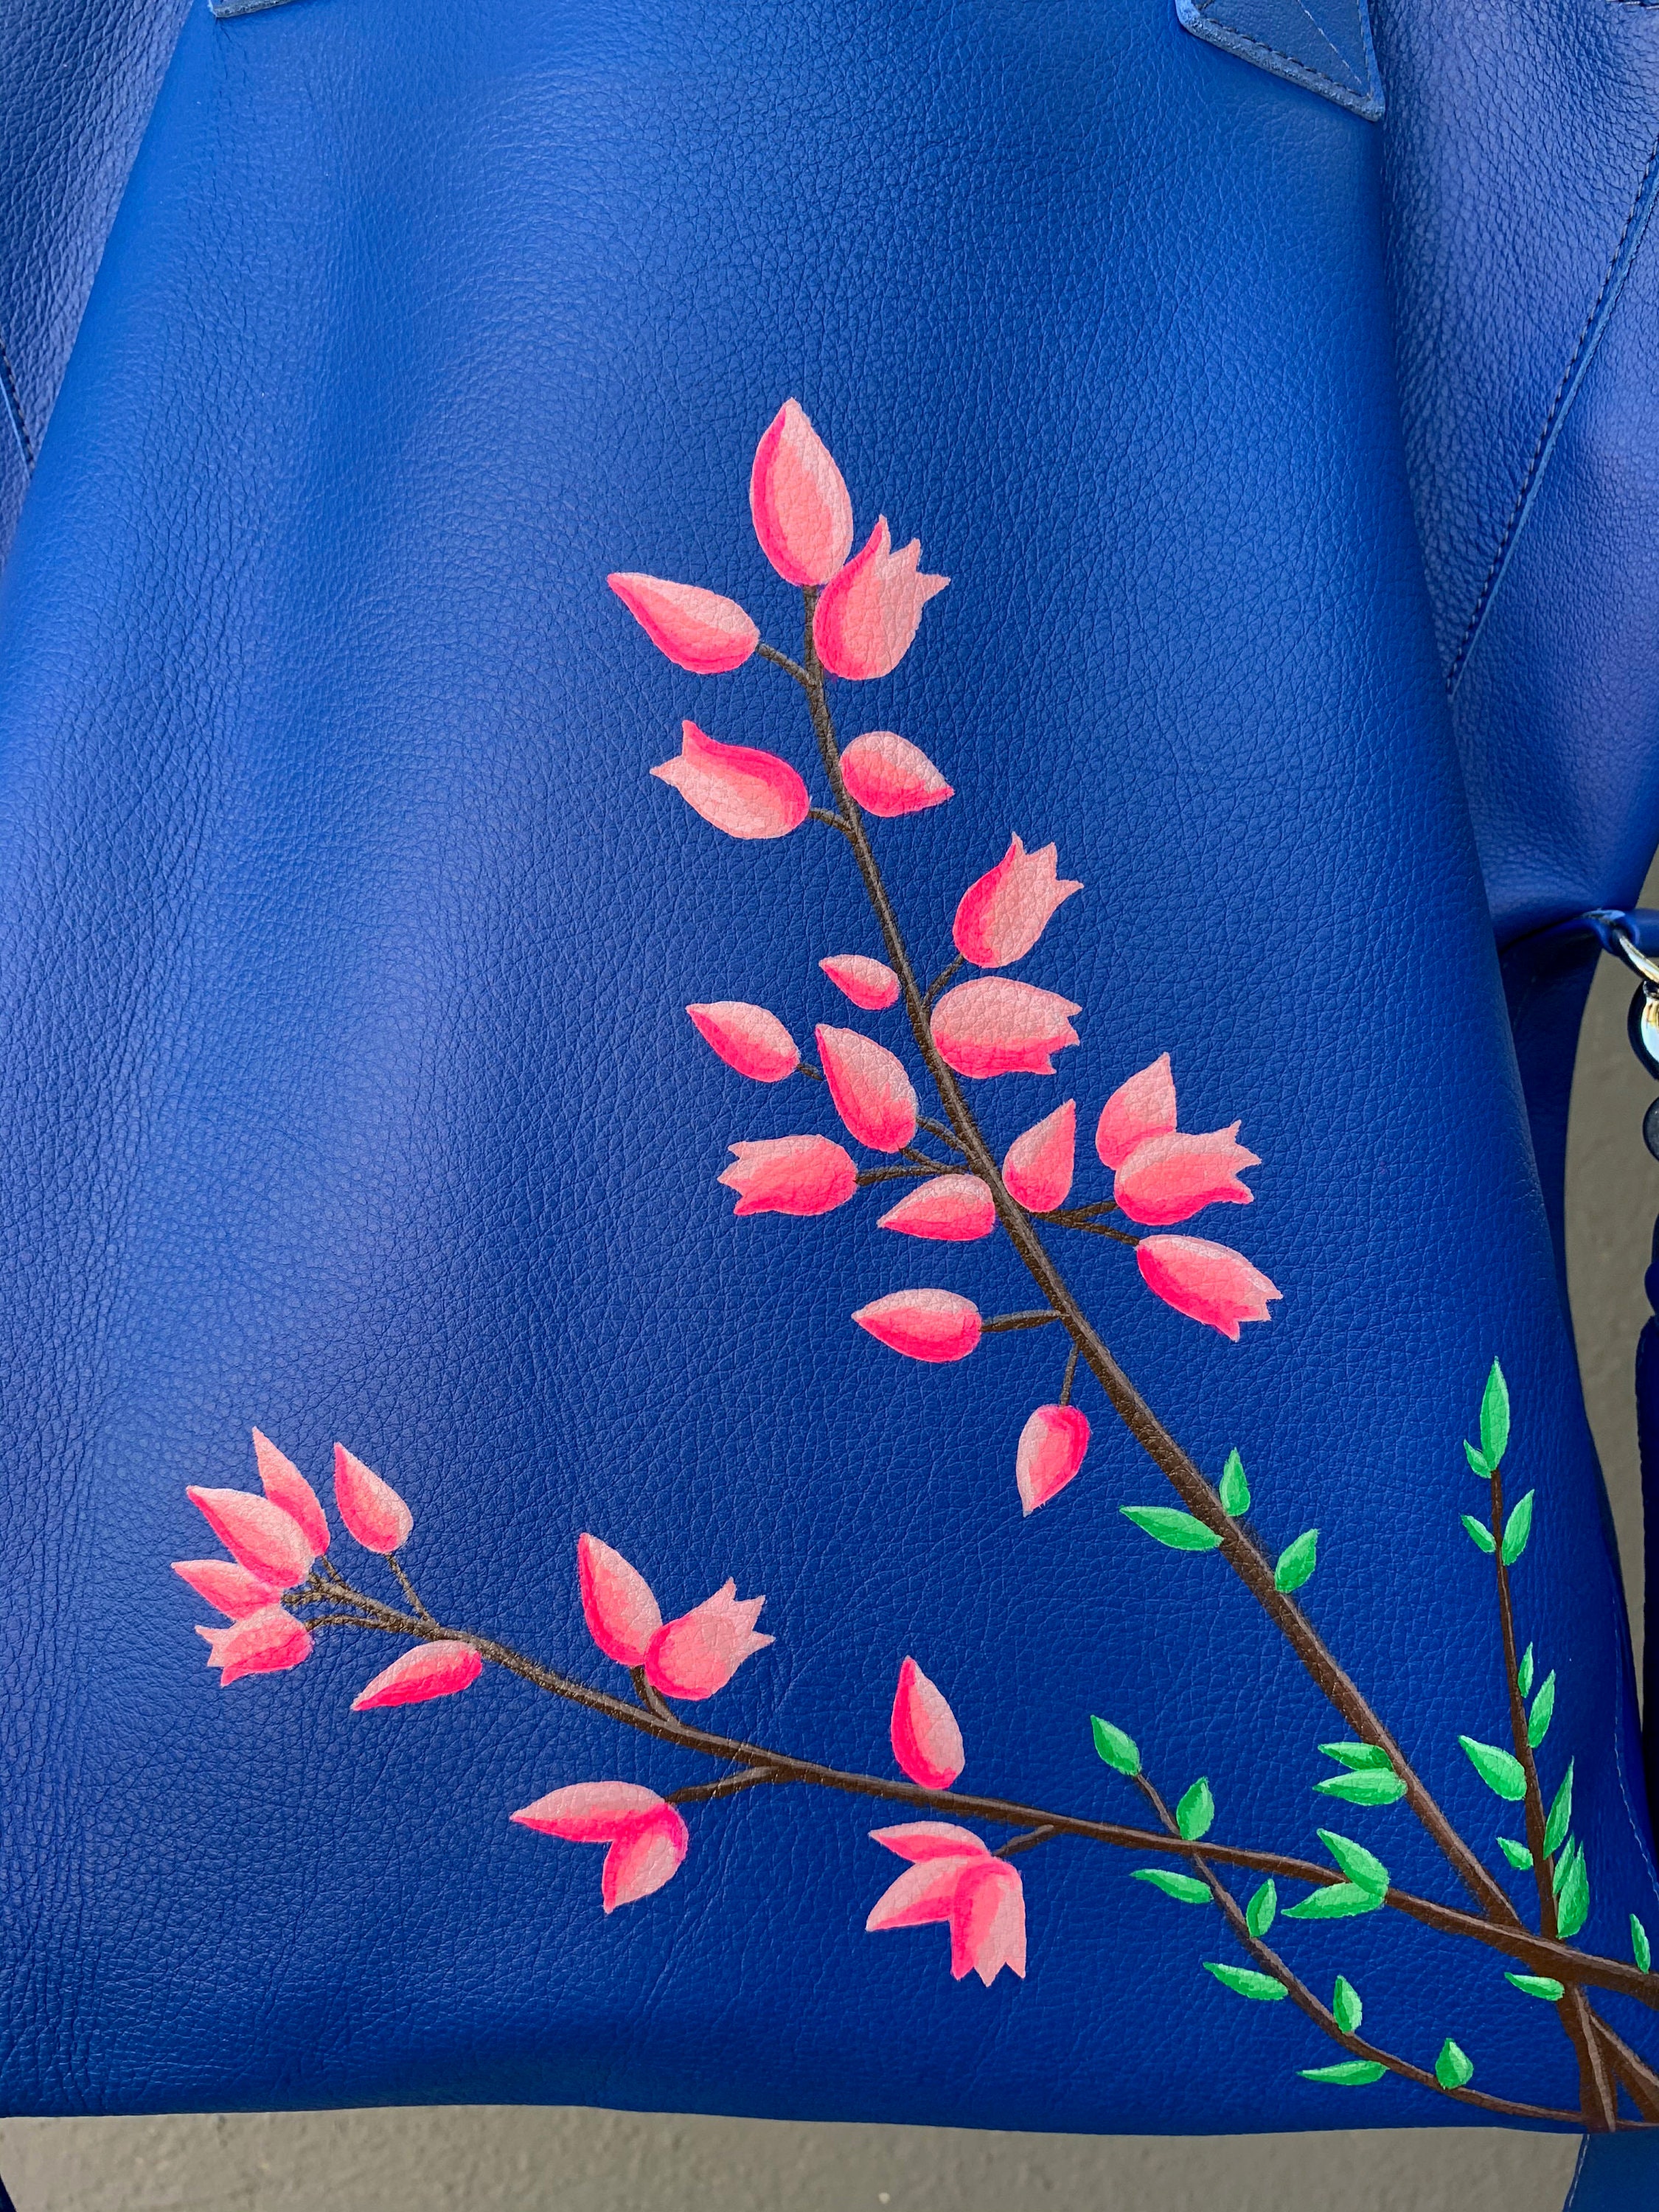 NEW! CHARLIE FOLD-OVER TOTE in ROYAL BLUE LEATHER with FLOWERS and